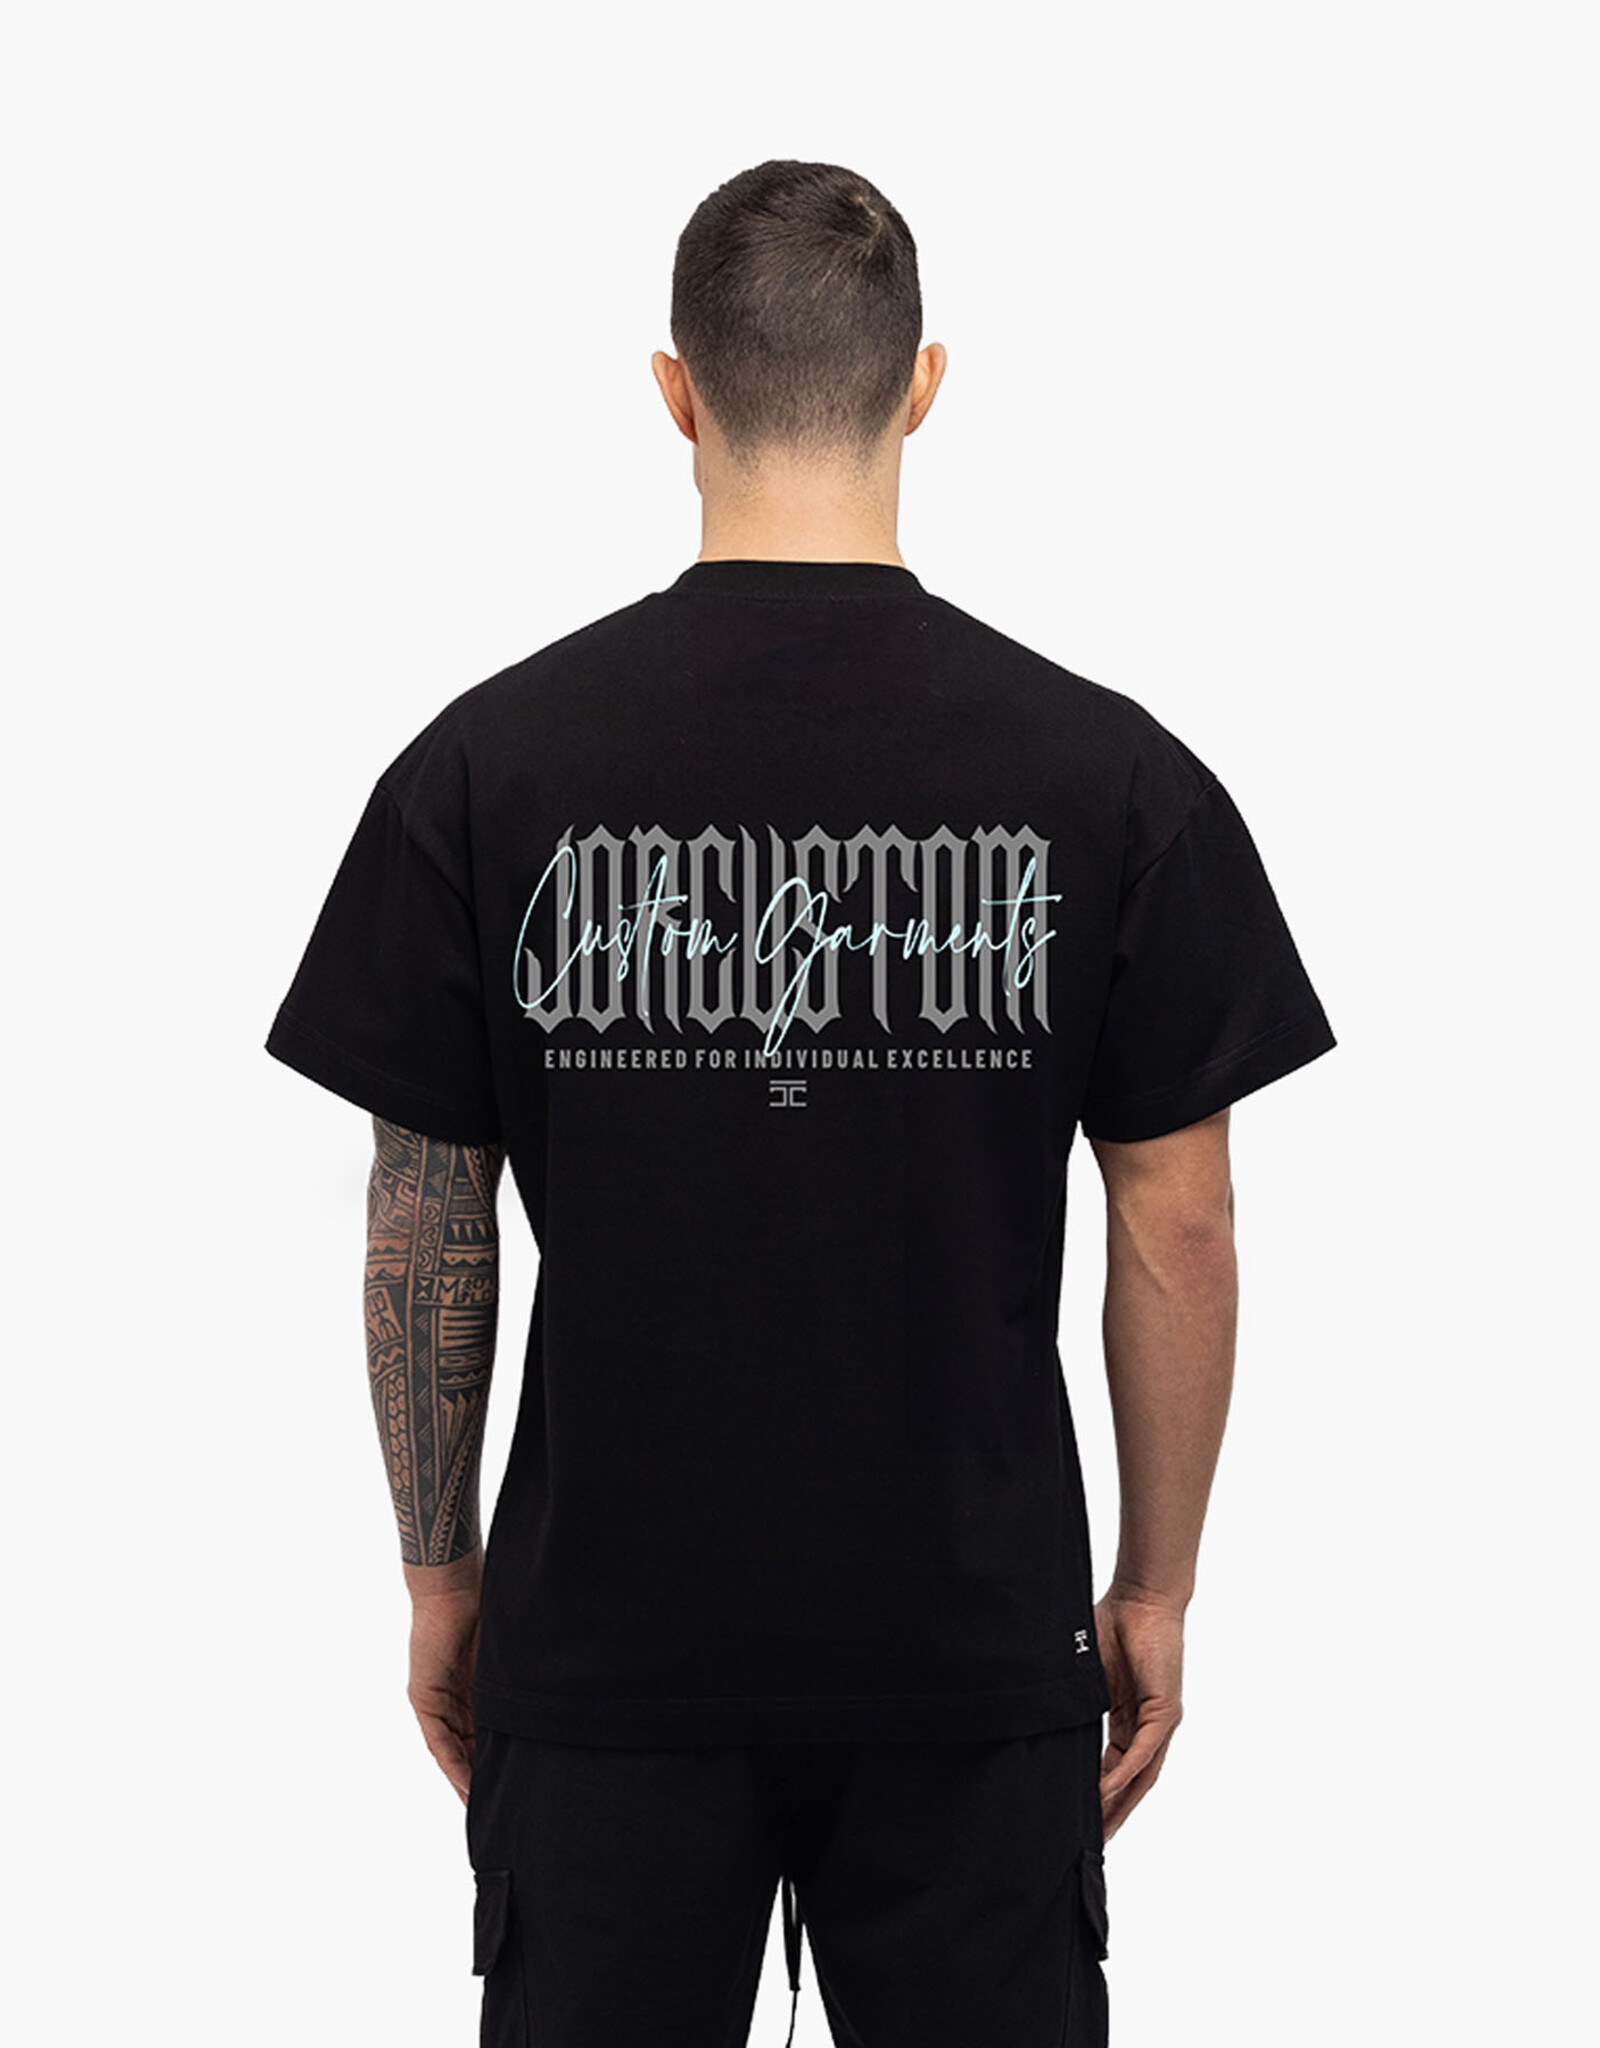 JorCustom Excellence loose fit T-Shirt